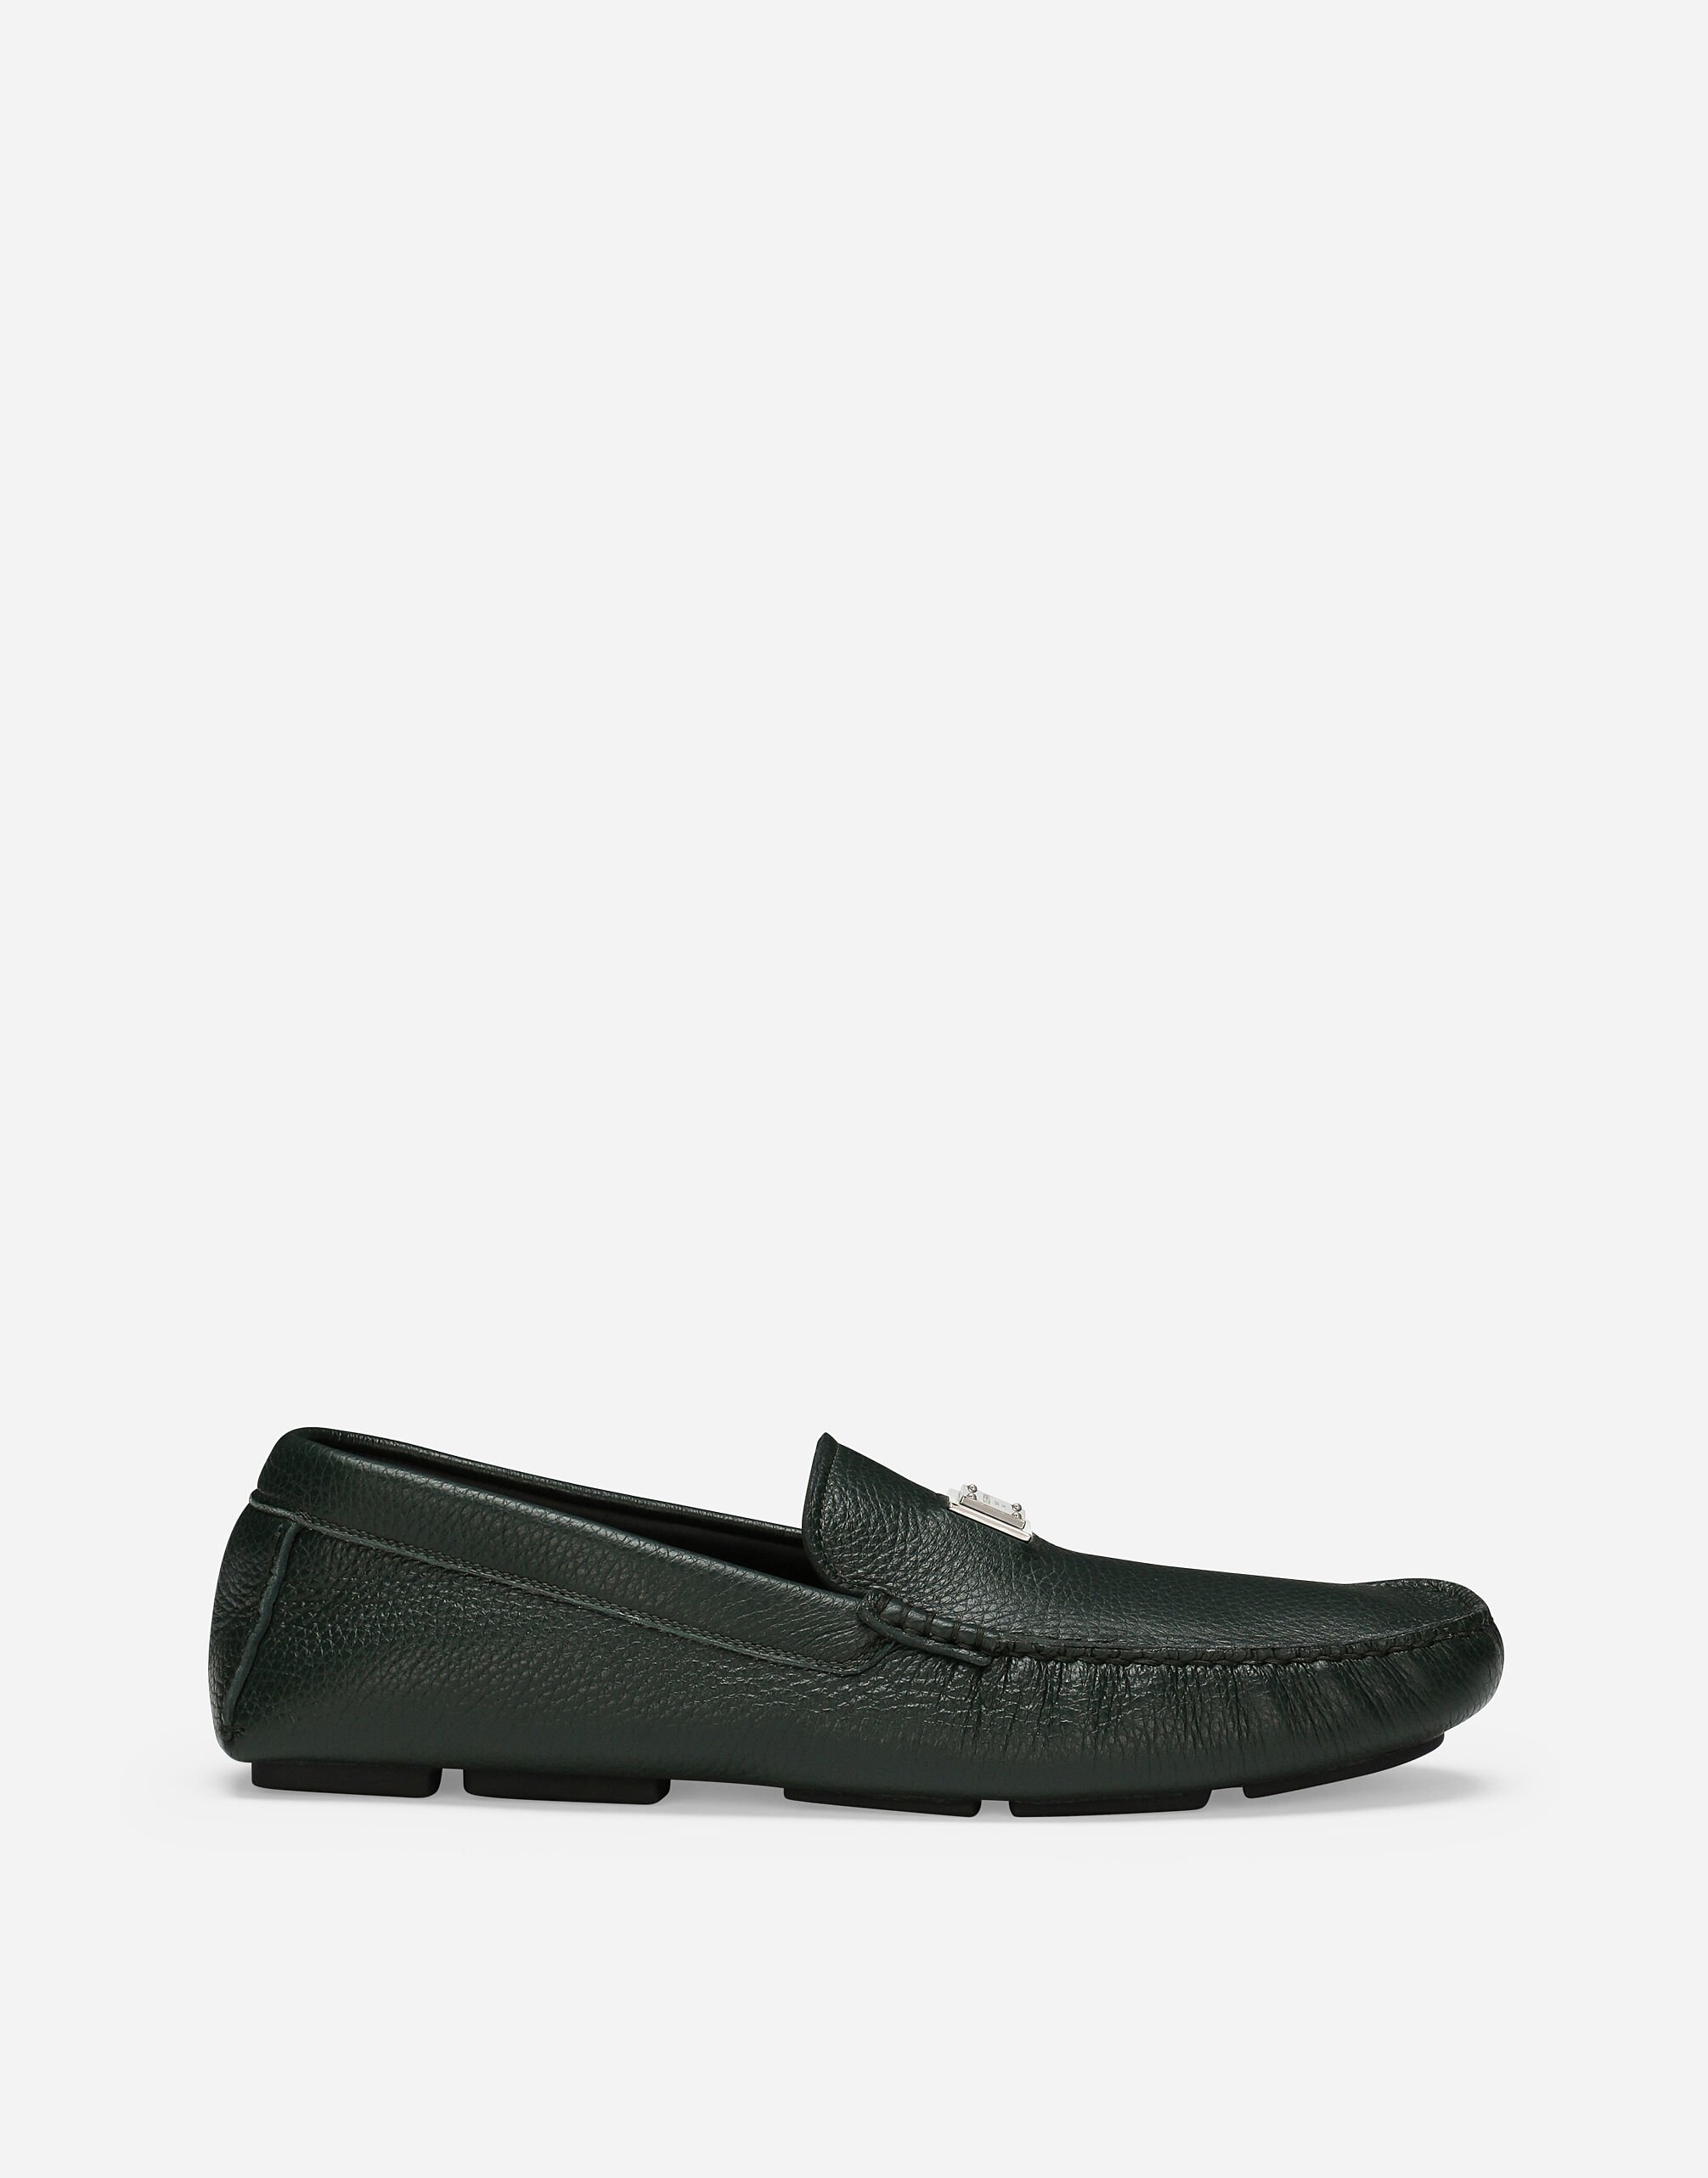 Men's shoes: sneakers, boots, loafers | Dolce&Gabbana®